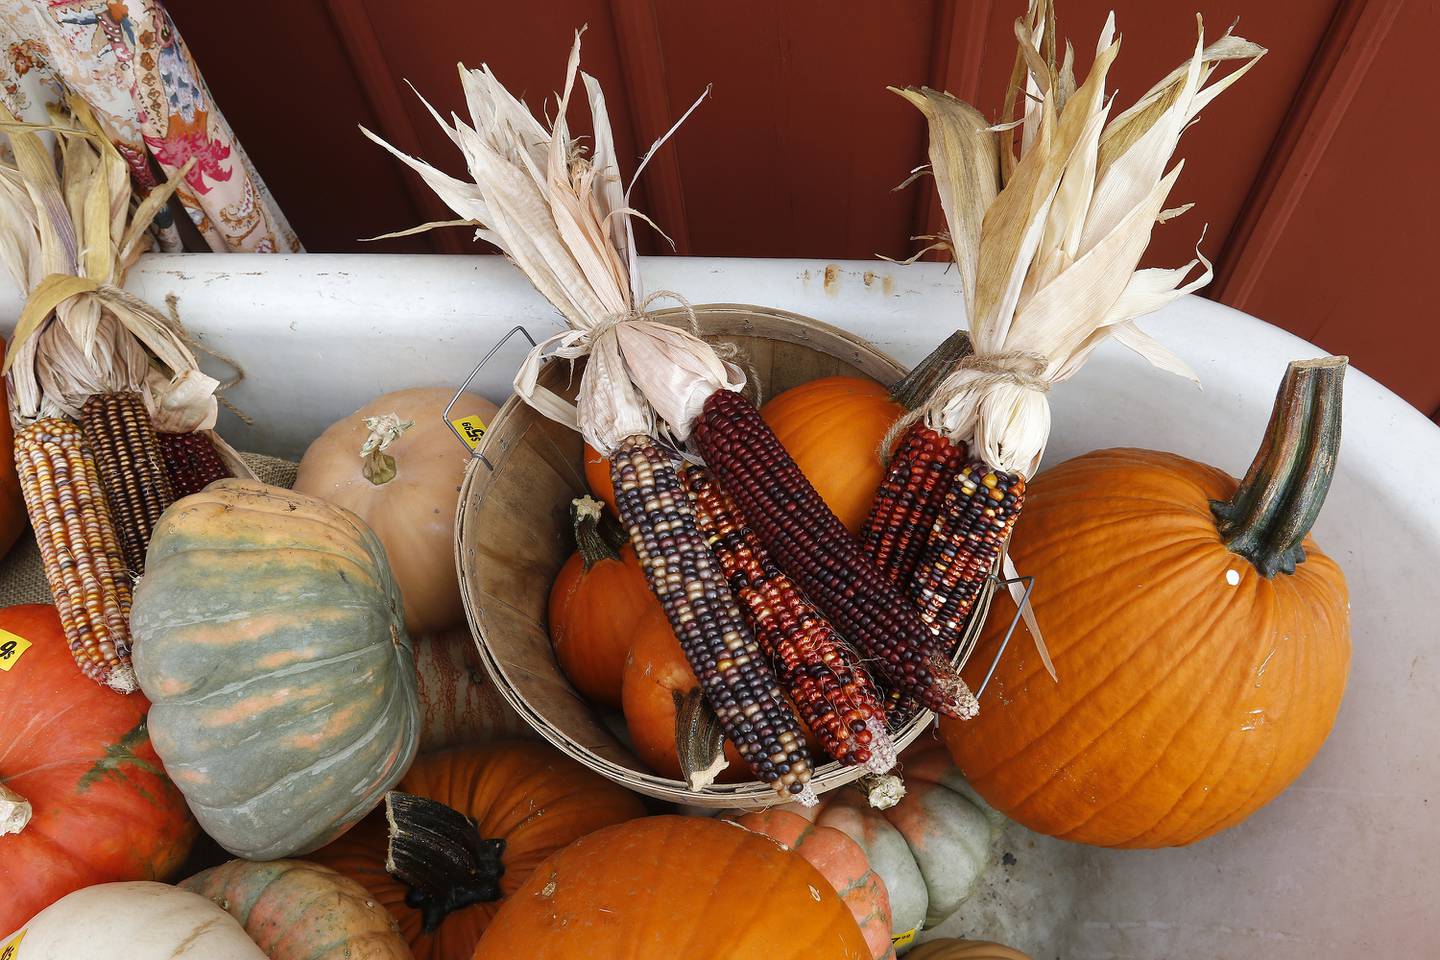 Pumpkins of all shapes and sizes are available along with other autumn-related foods, decorations, and more during the Fall on the Farm event at Tom's Market on Saturday, Oct. 2, 2021 in Huntley.  The month-long event began on Friday and will conclude Oct. 31.